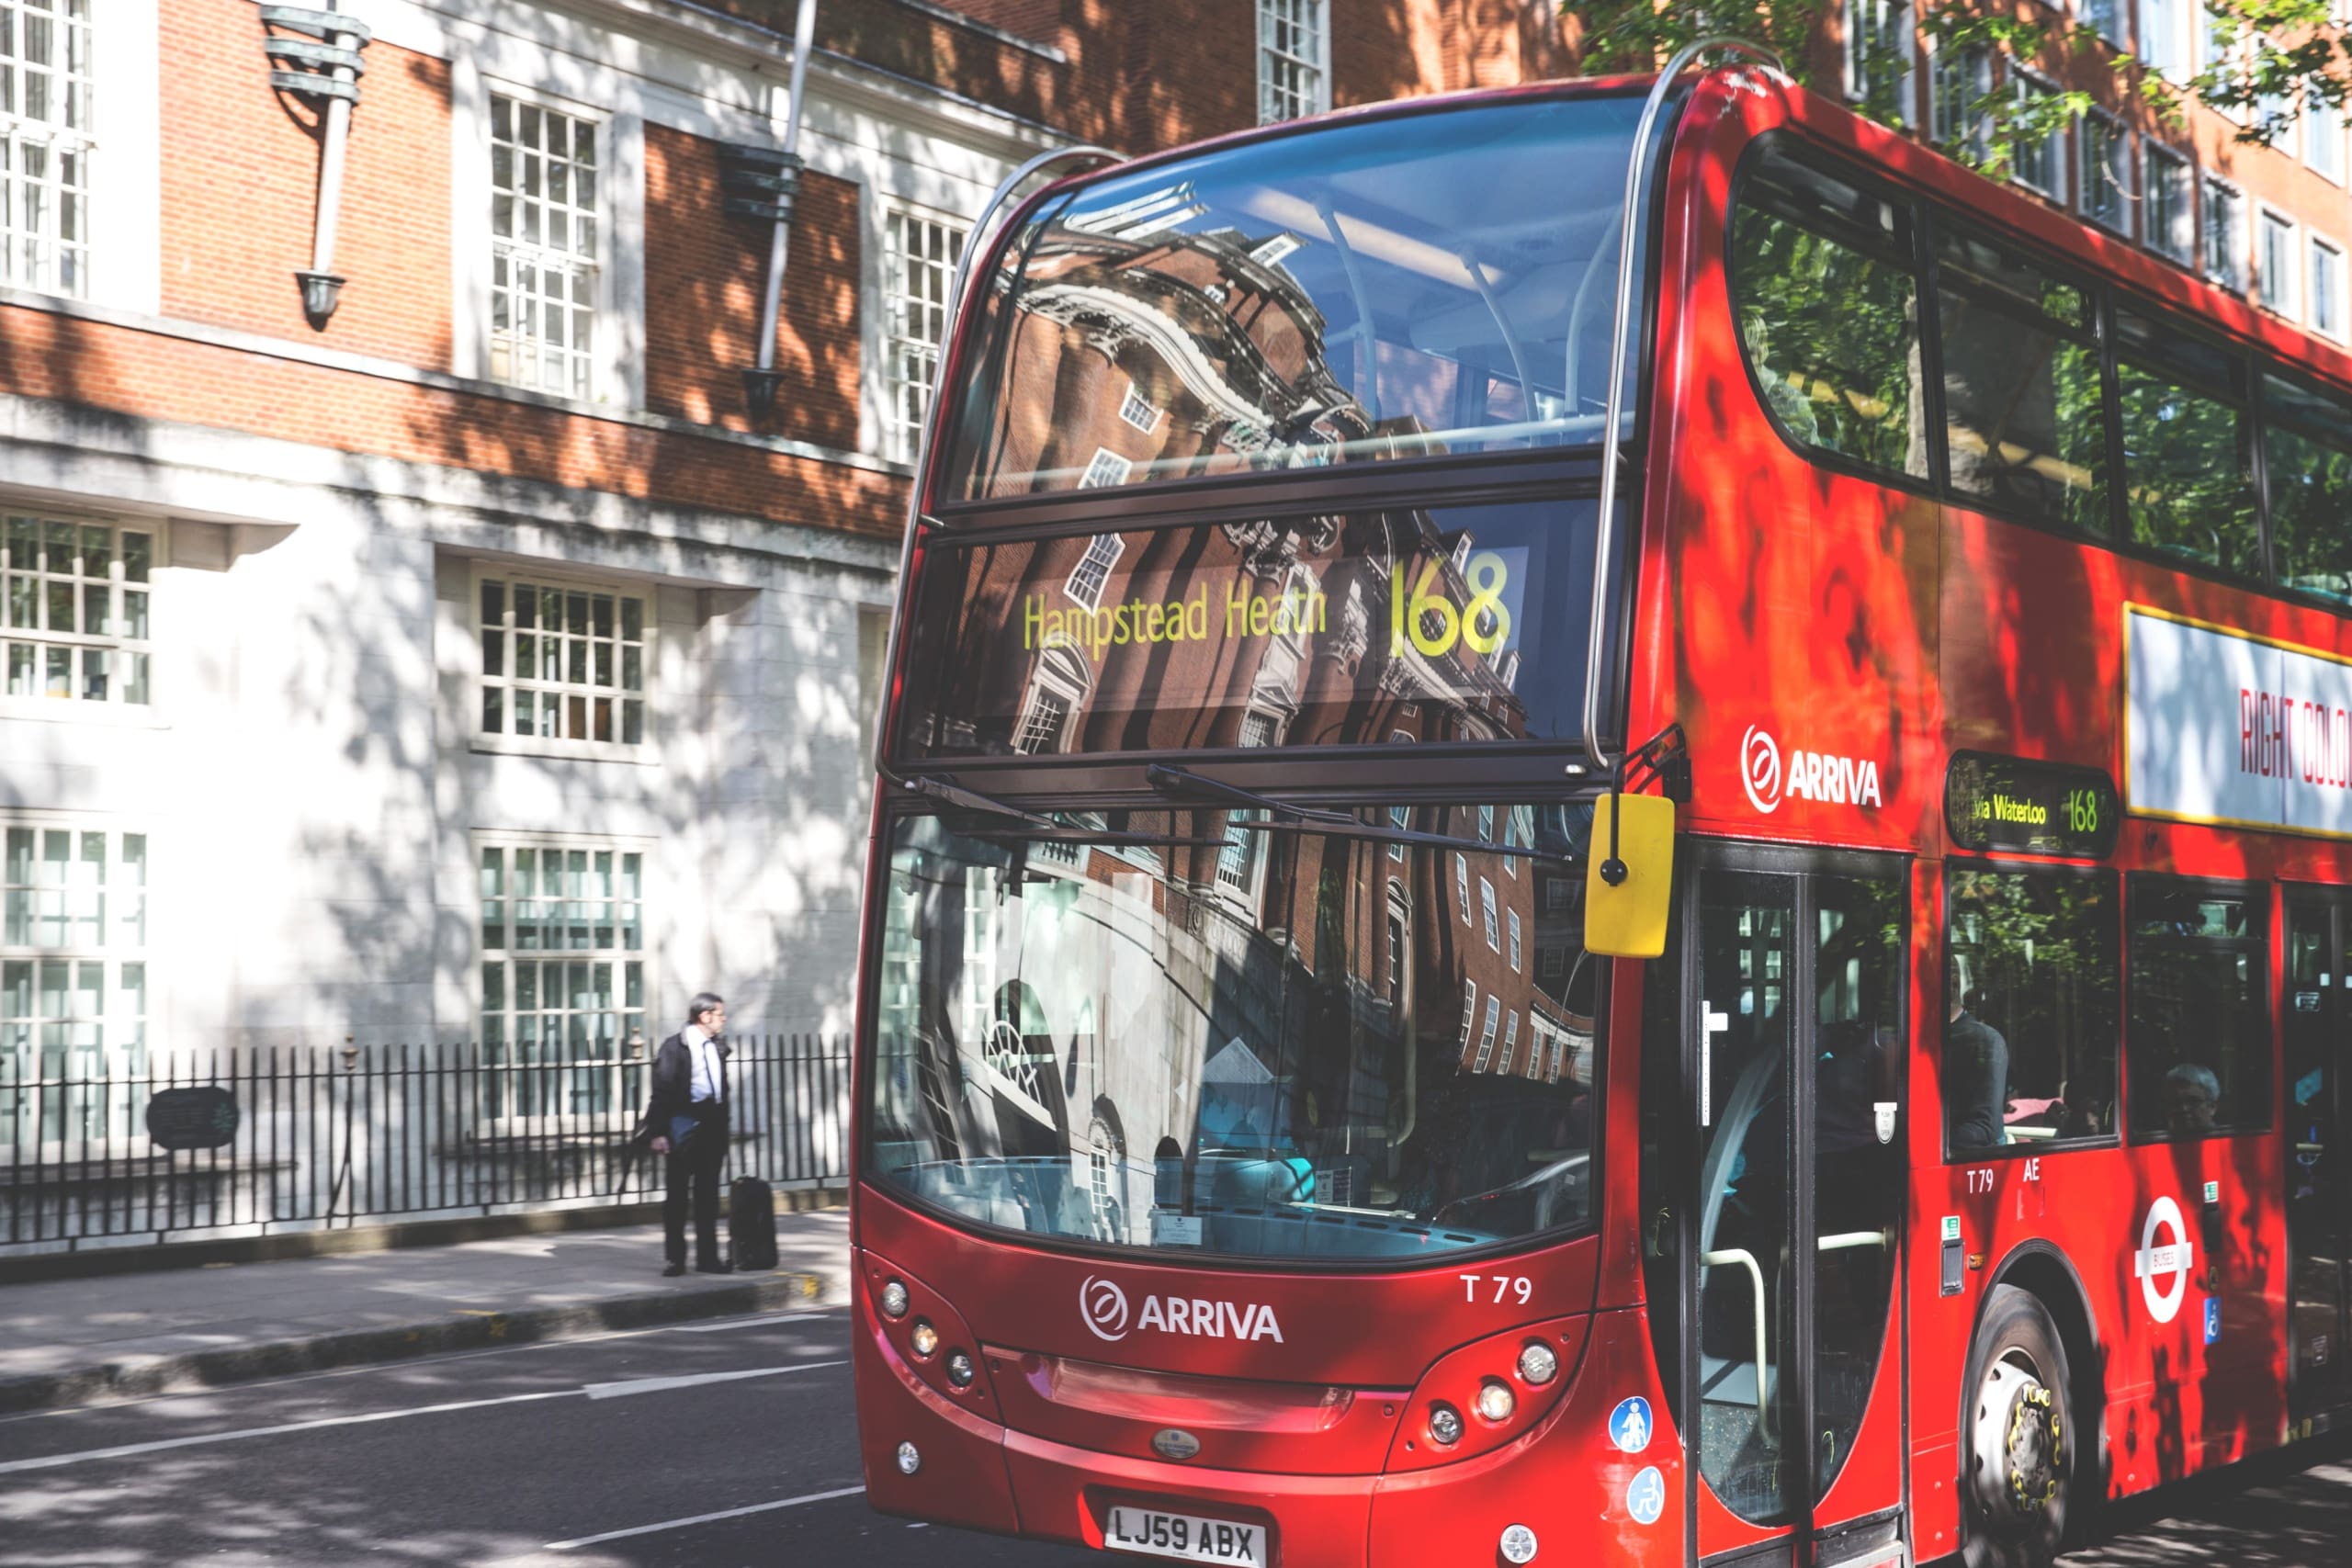 A red bus at a stop in a street of London.